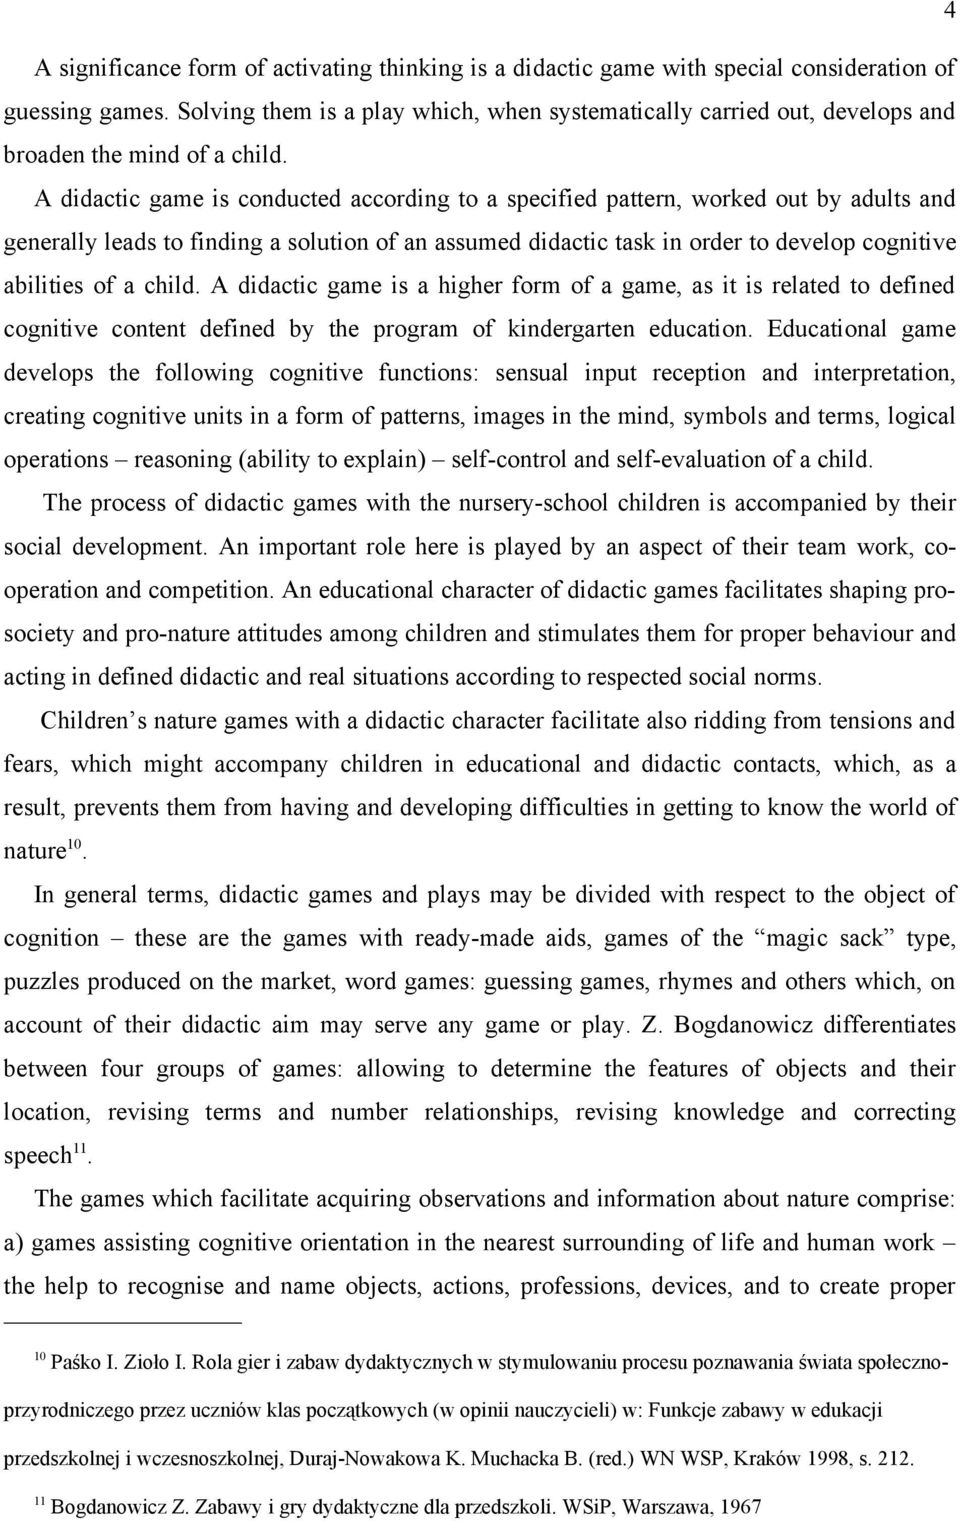 A didactic game is conducted according to a specified pattern, worked out by adults and generally leads to finding a solution of an assumed didactic task in order to develop cognitive abilities of a